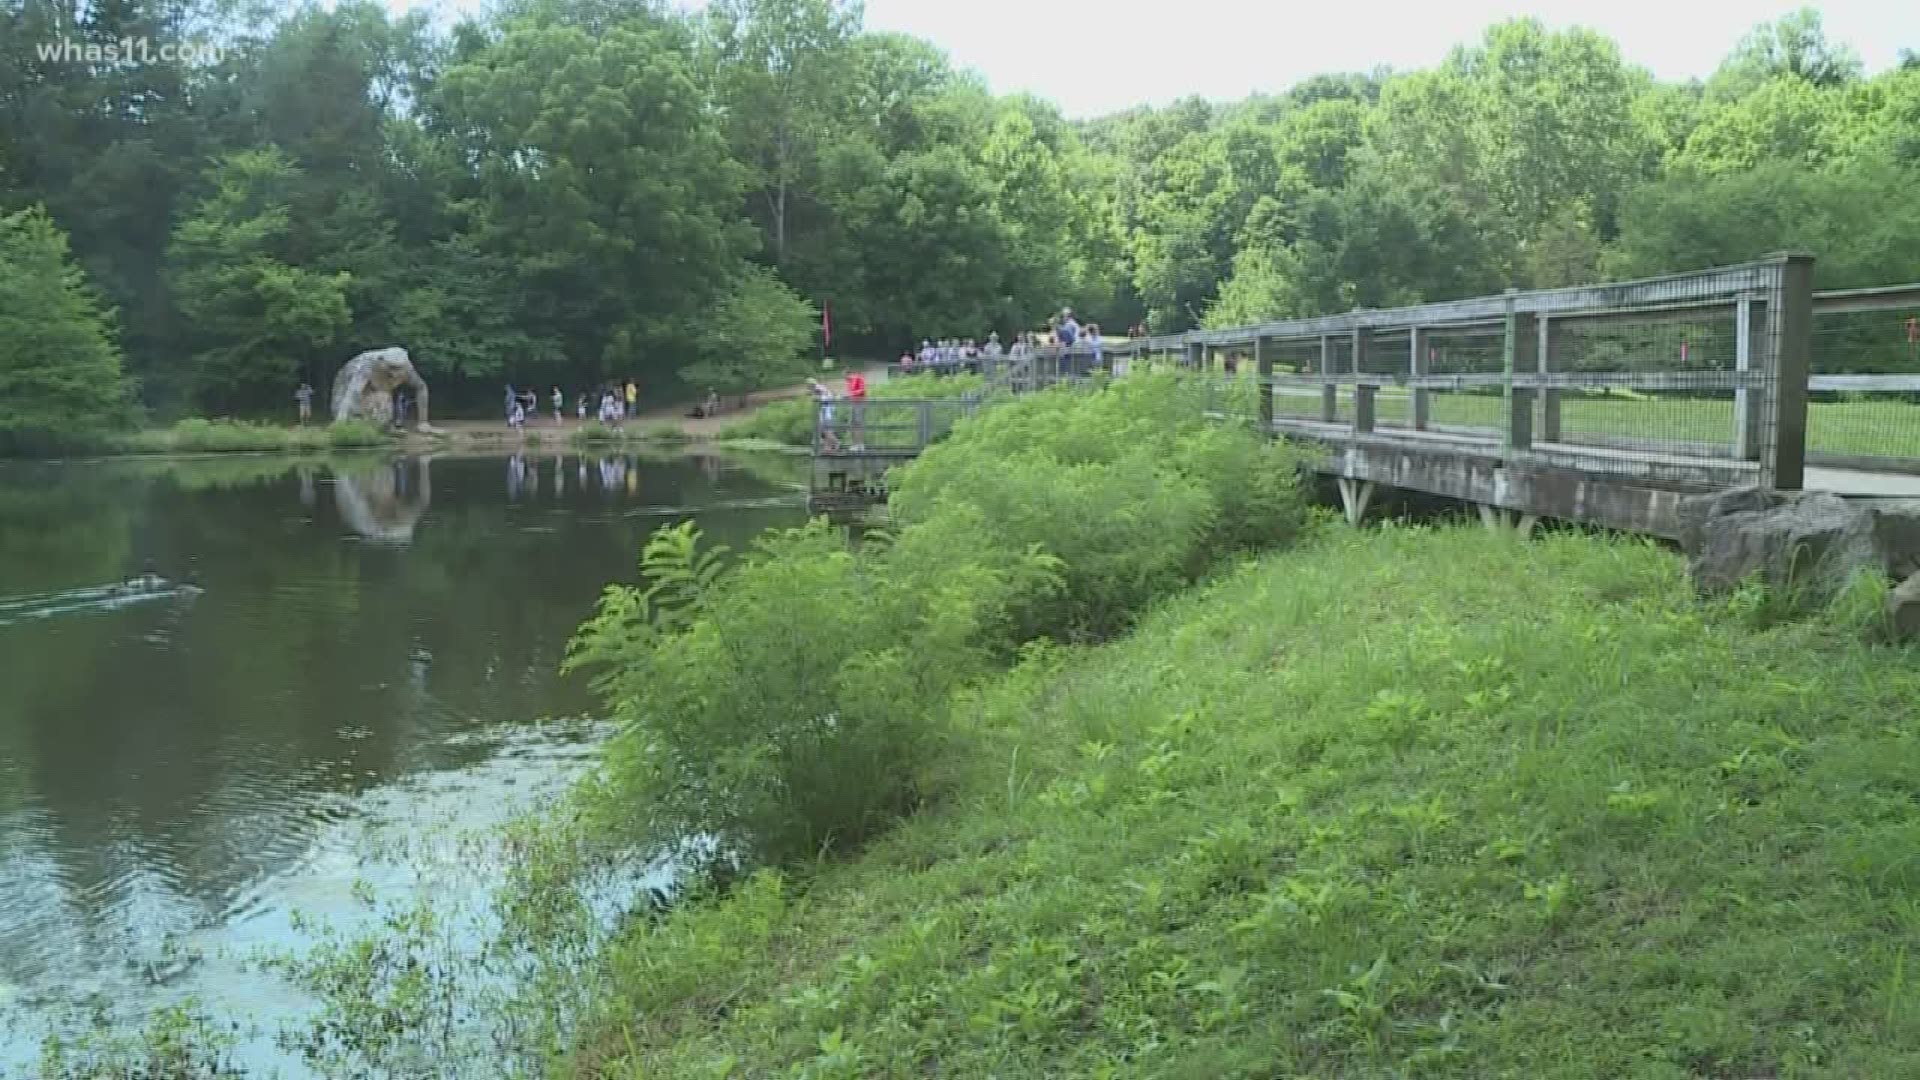 The Bernheim Forest has launched a fundraising campaign in their fight against a proposed pipeline.